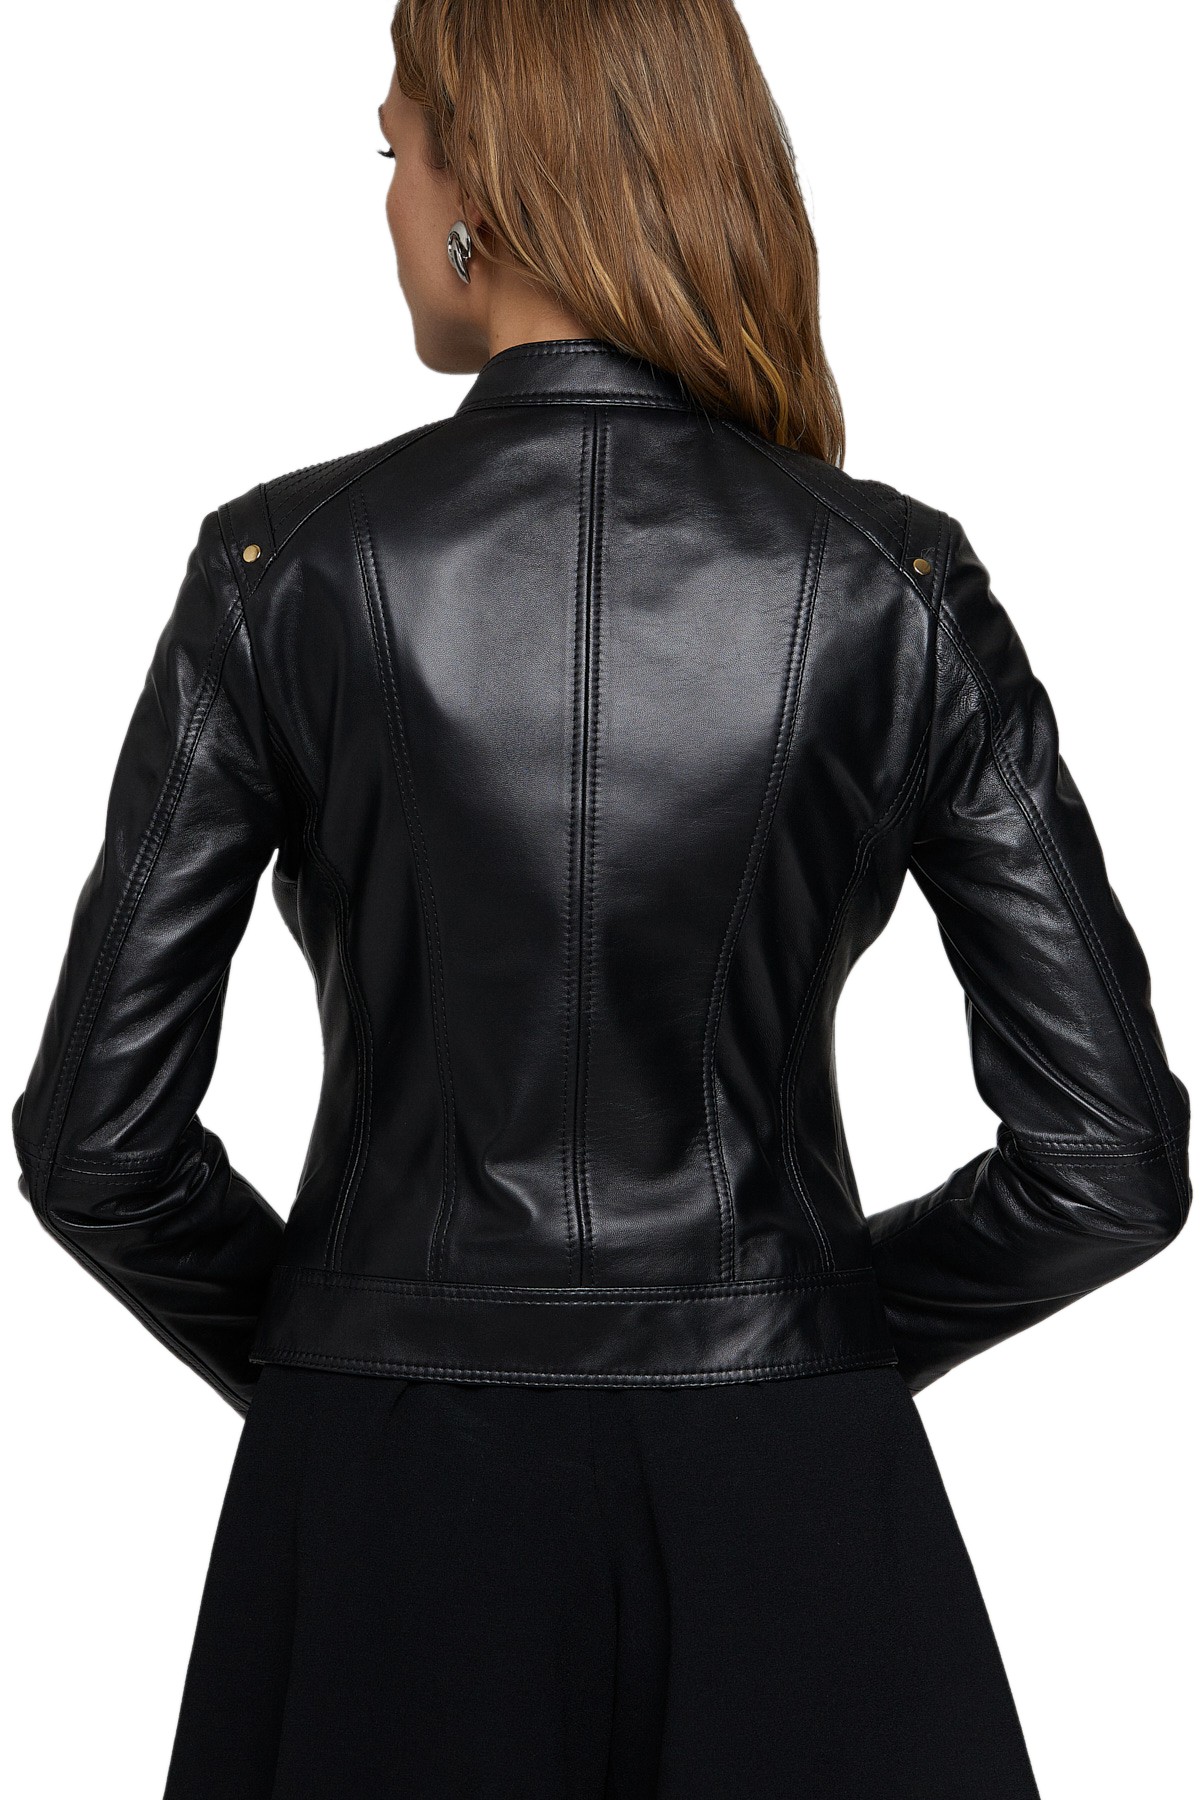 womens black leather jacket for bikers 3